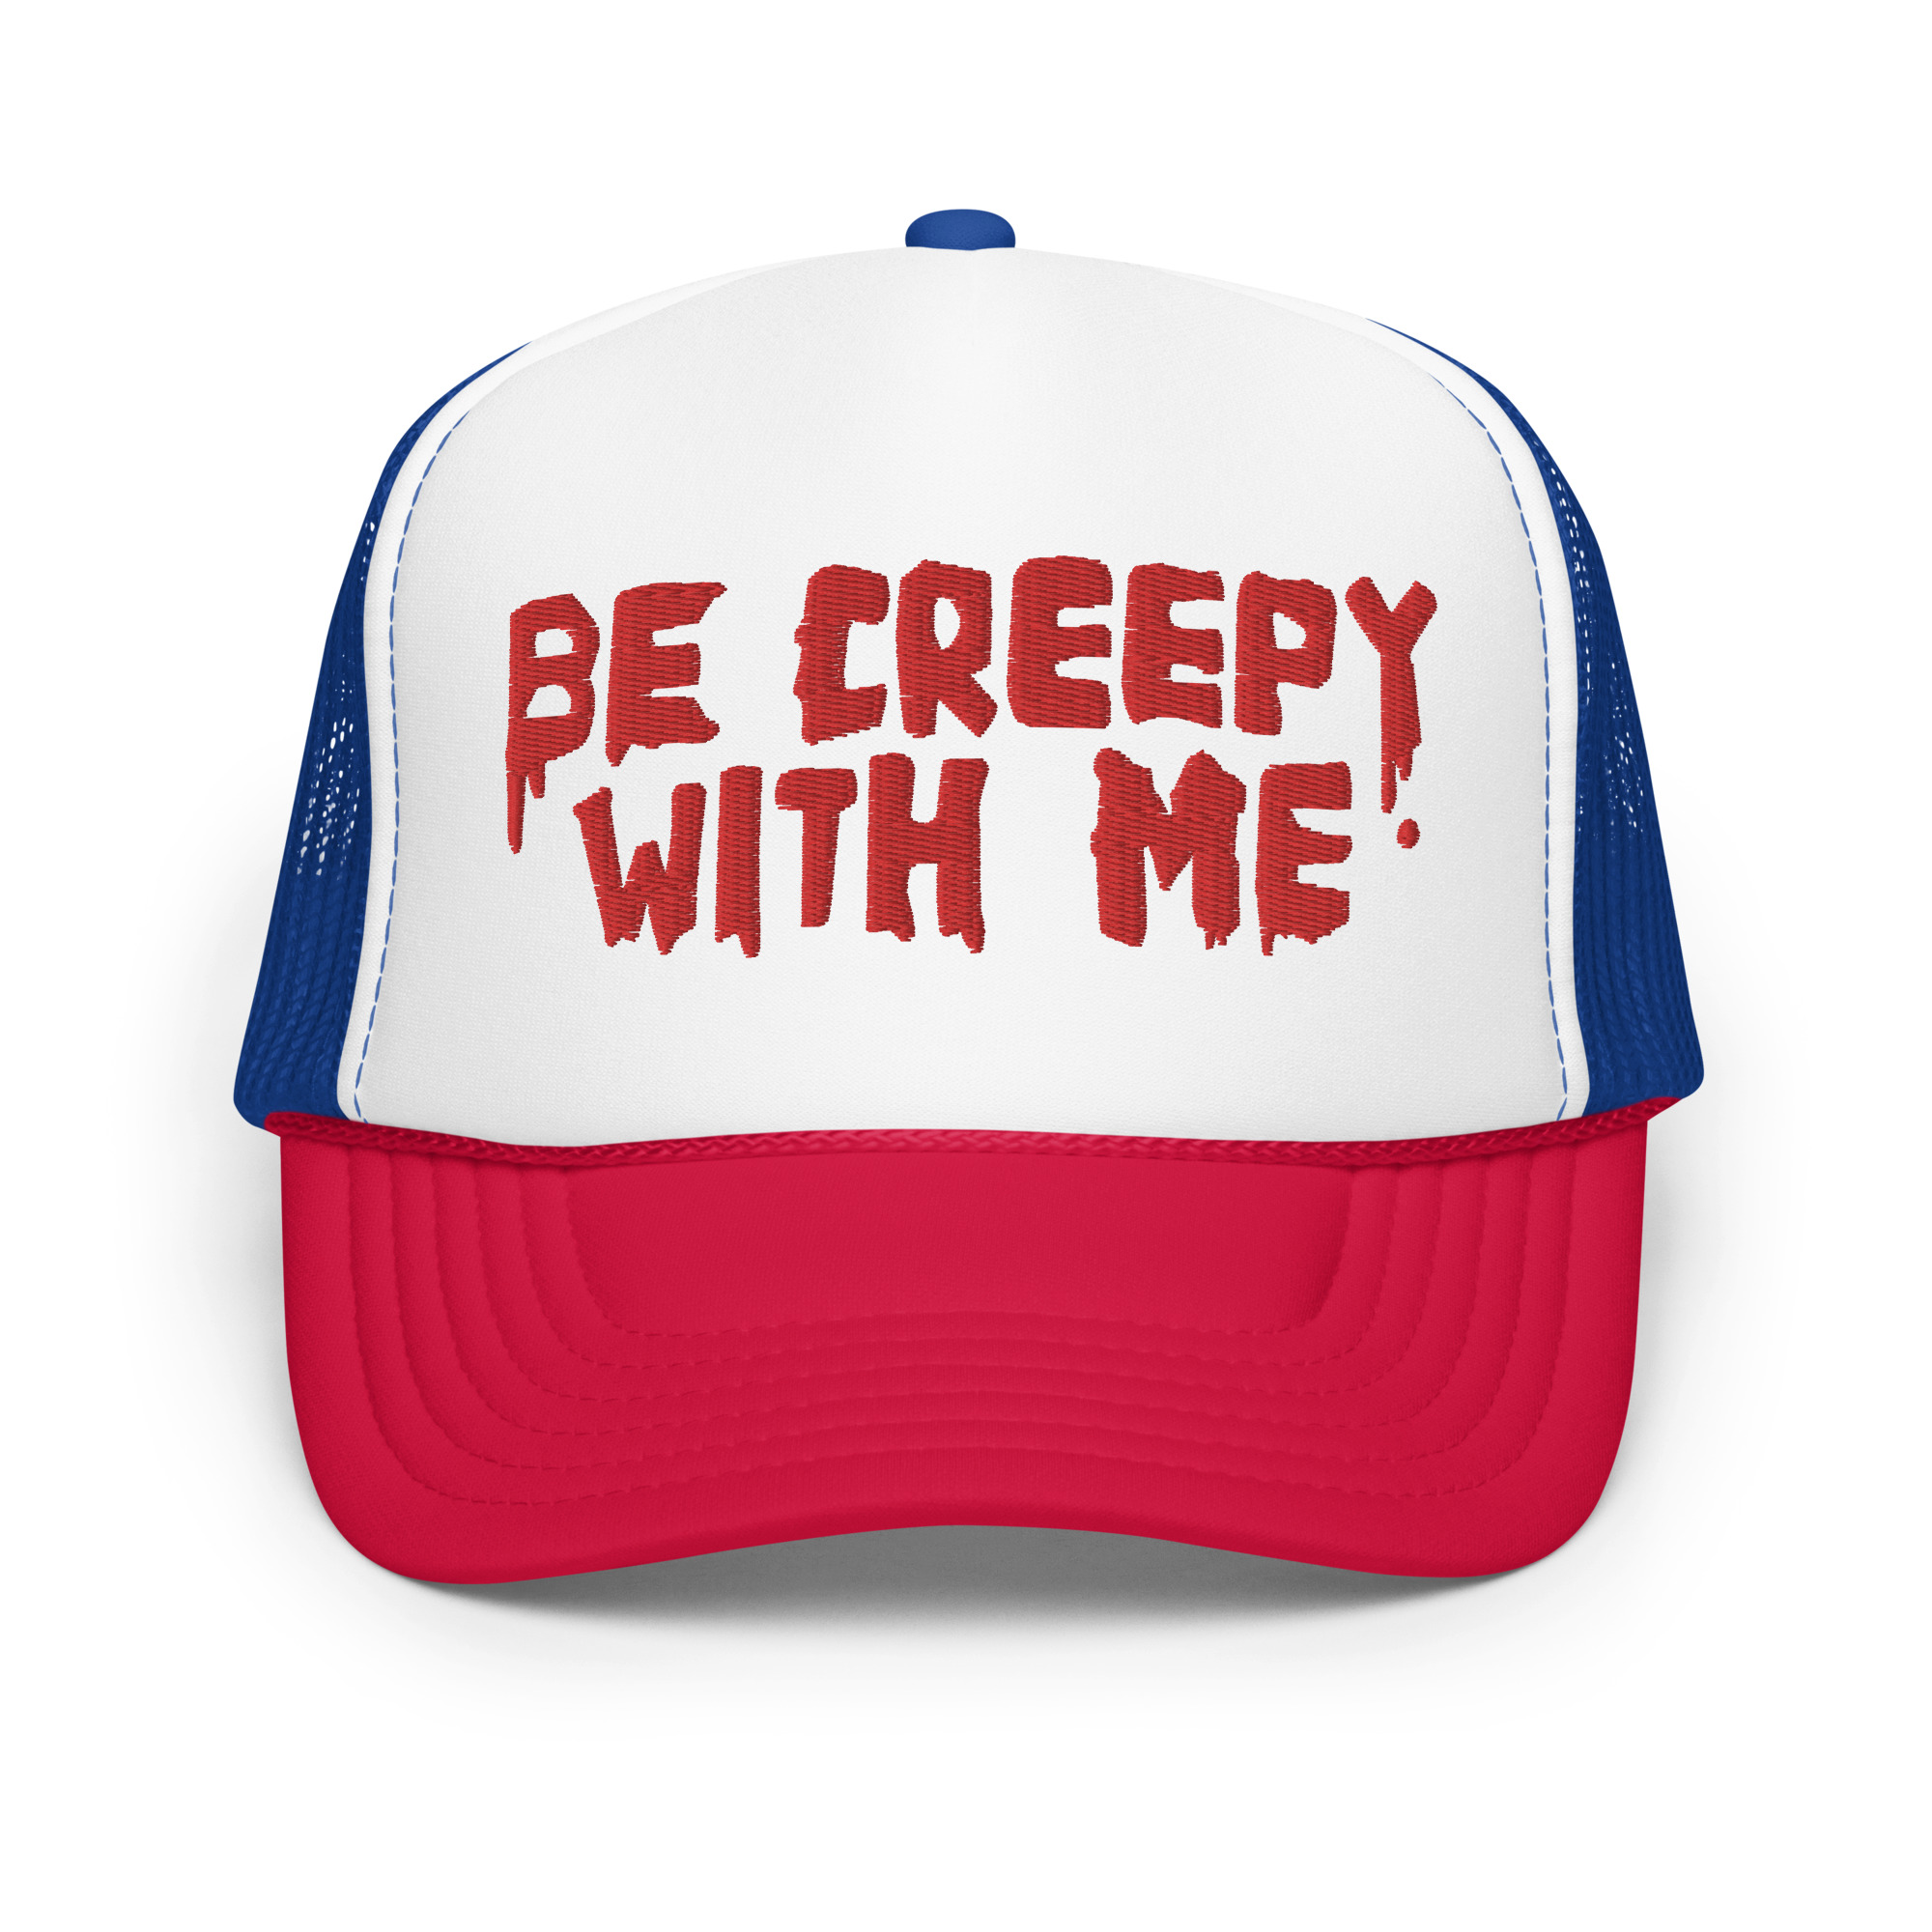 Be Creepy With Me - Puffy Foam trucker hat